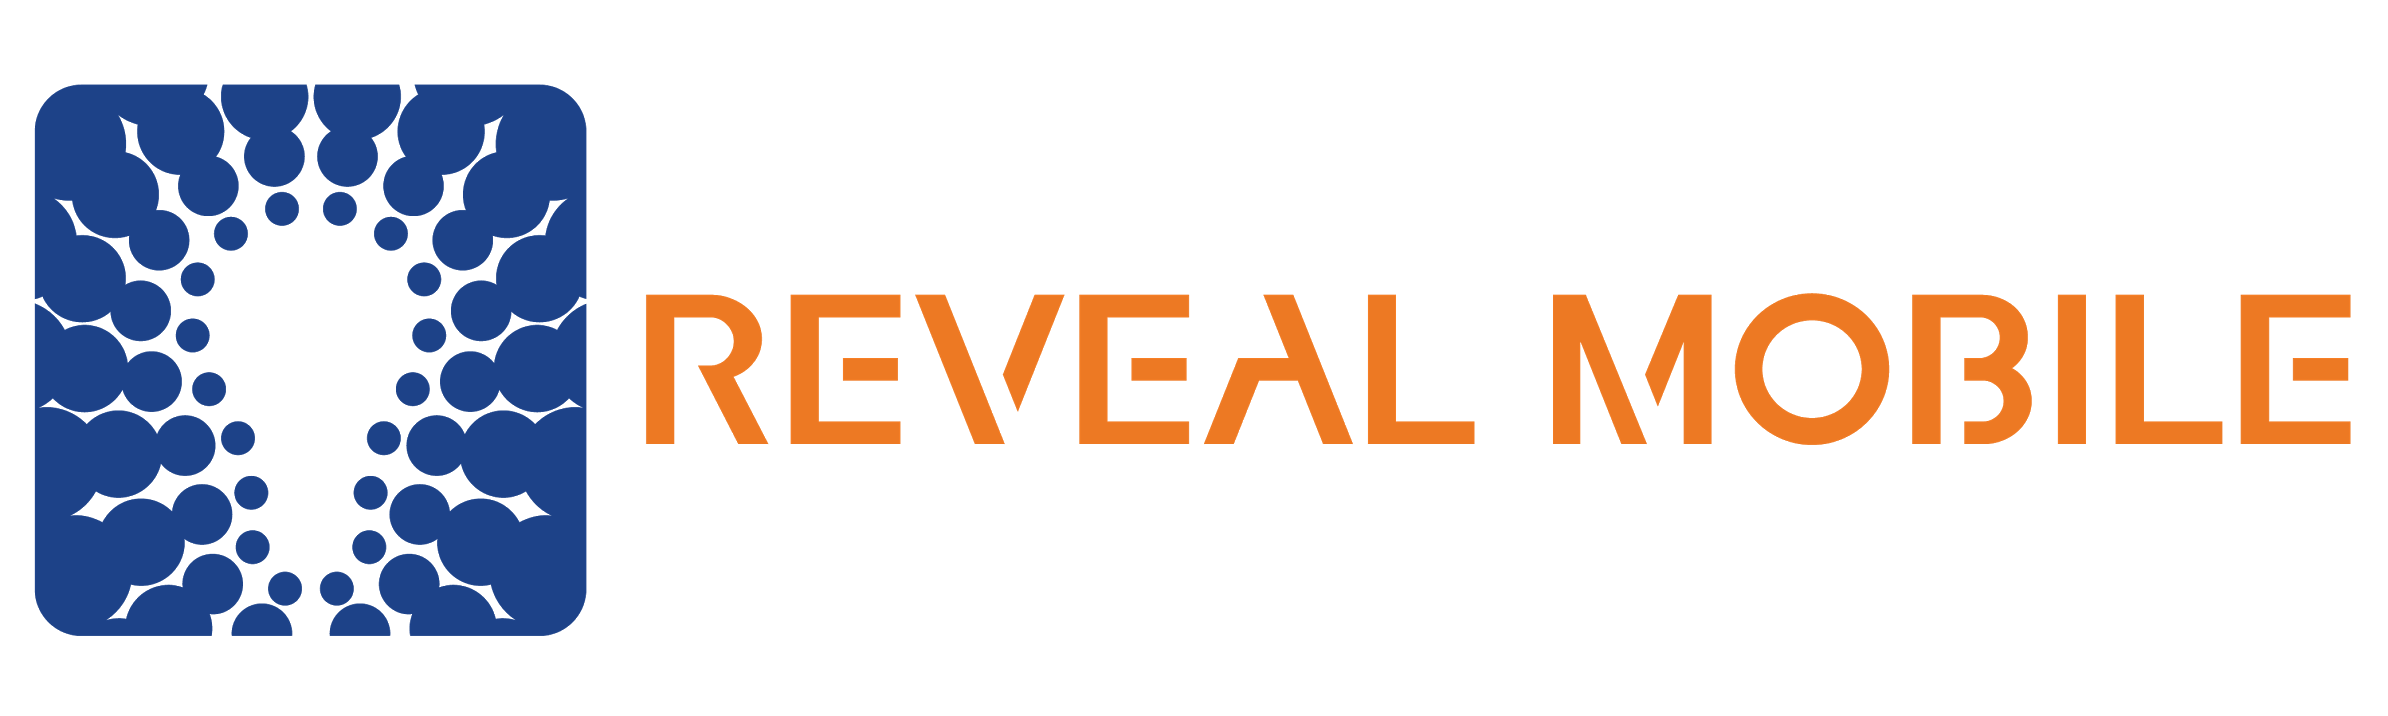 Reveal Mobile